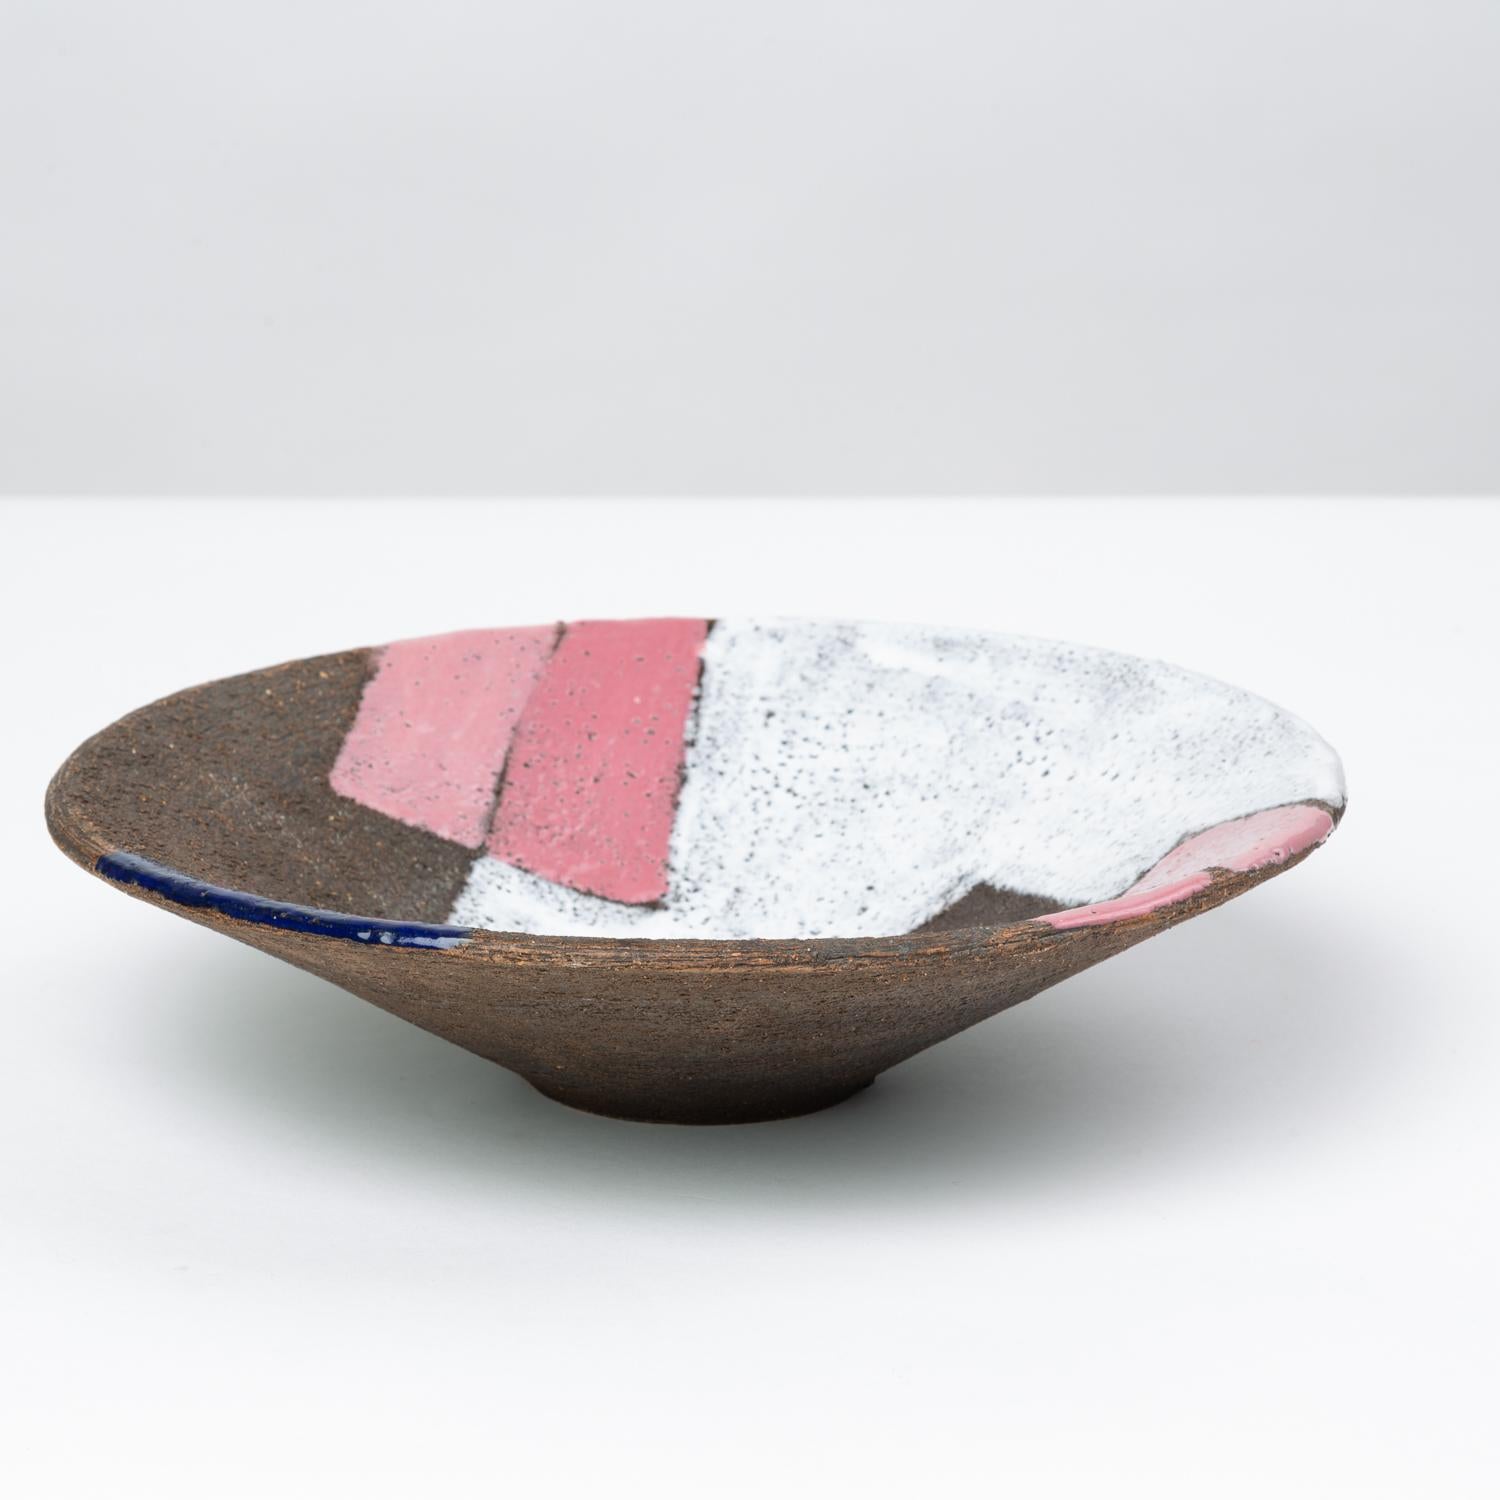 A decorative bowl with straight-slanted sides from Italian ceramicist Bitossi. Attributed to Aldo Londi, this patchwork design from the 1960s employs thin washes of hand-painted glaze to a textured stoneware surface, creating a patchwork effect of